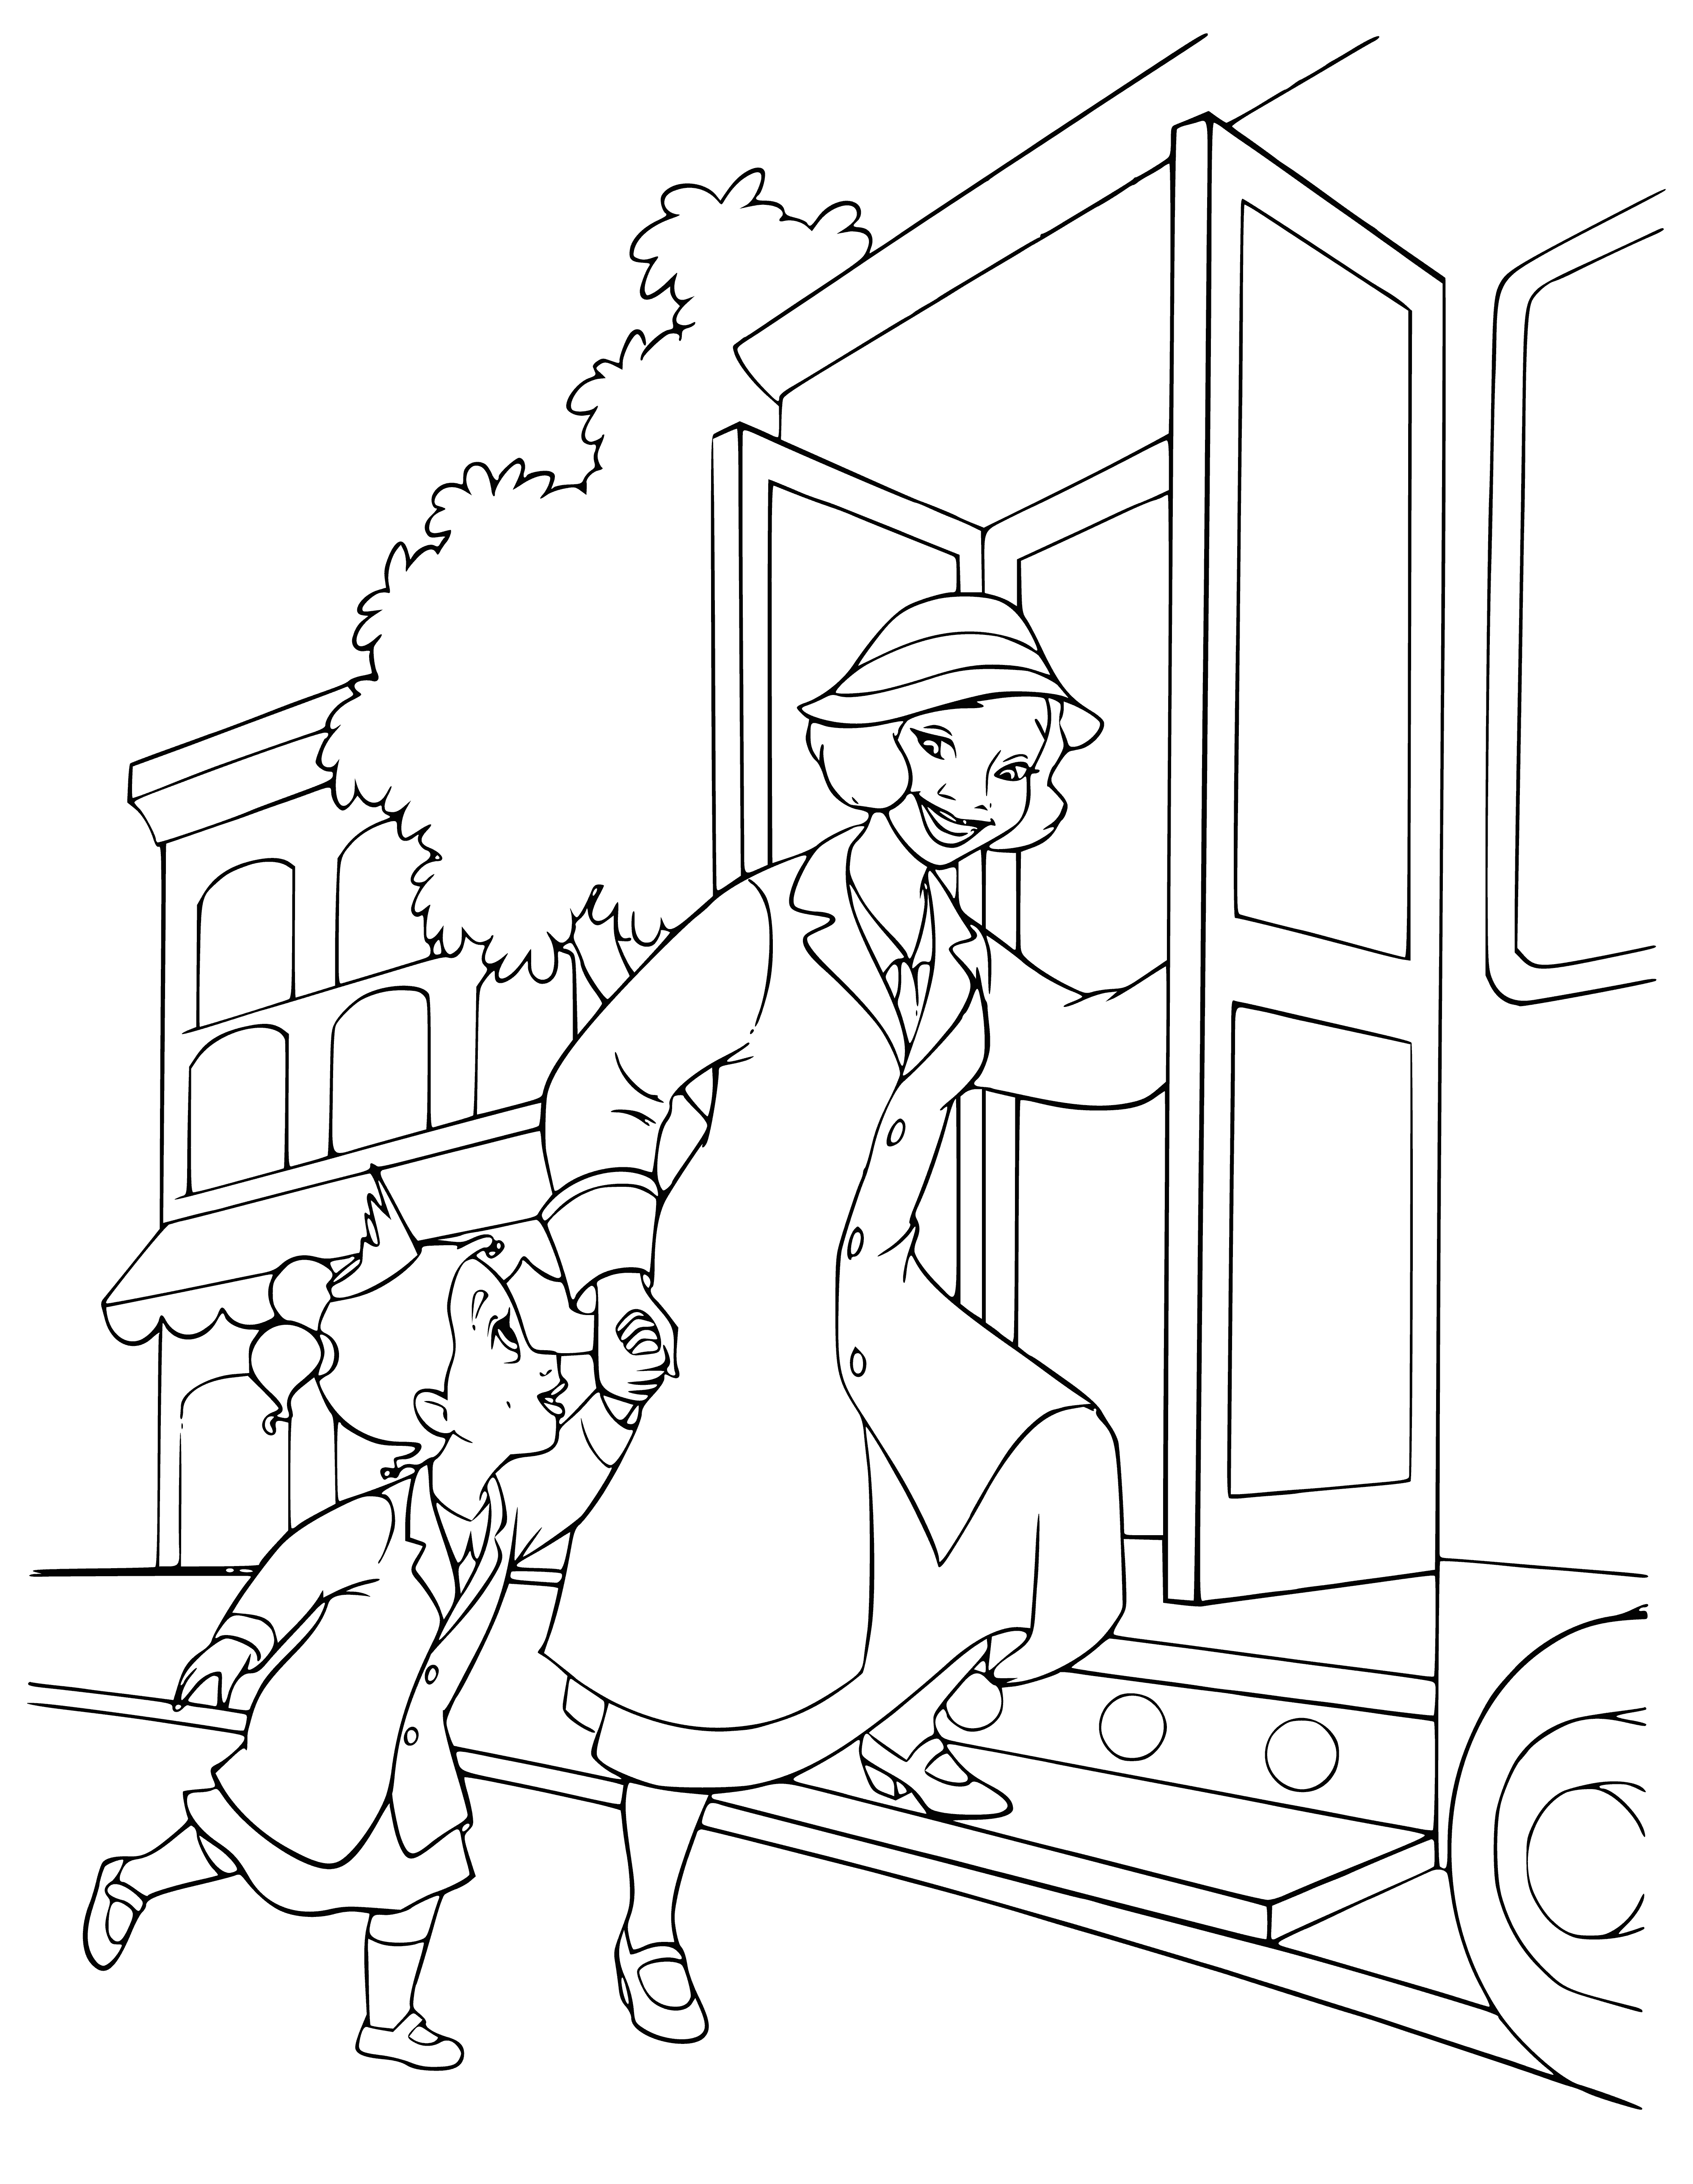 Baby Tiana with her mother coloring page